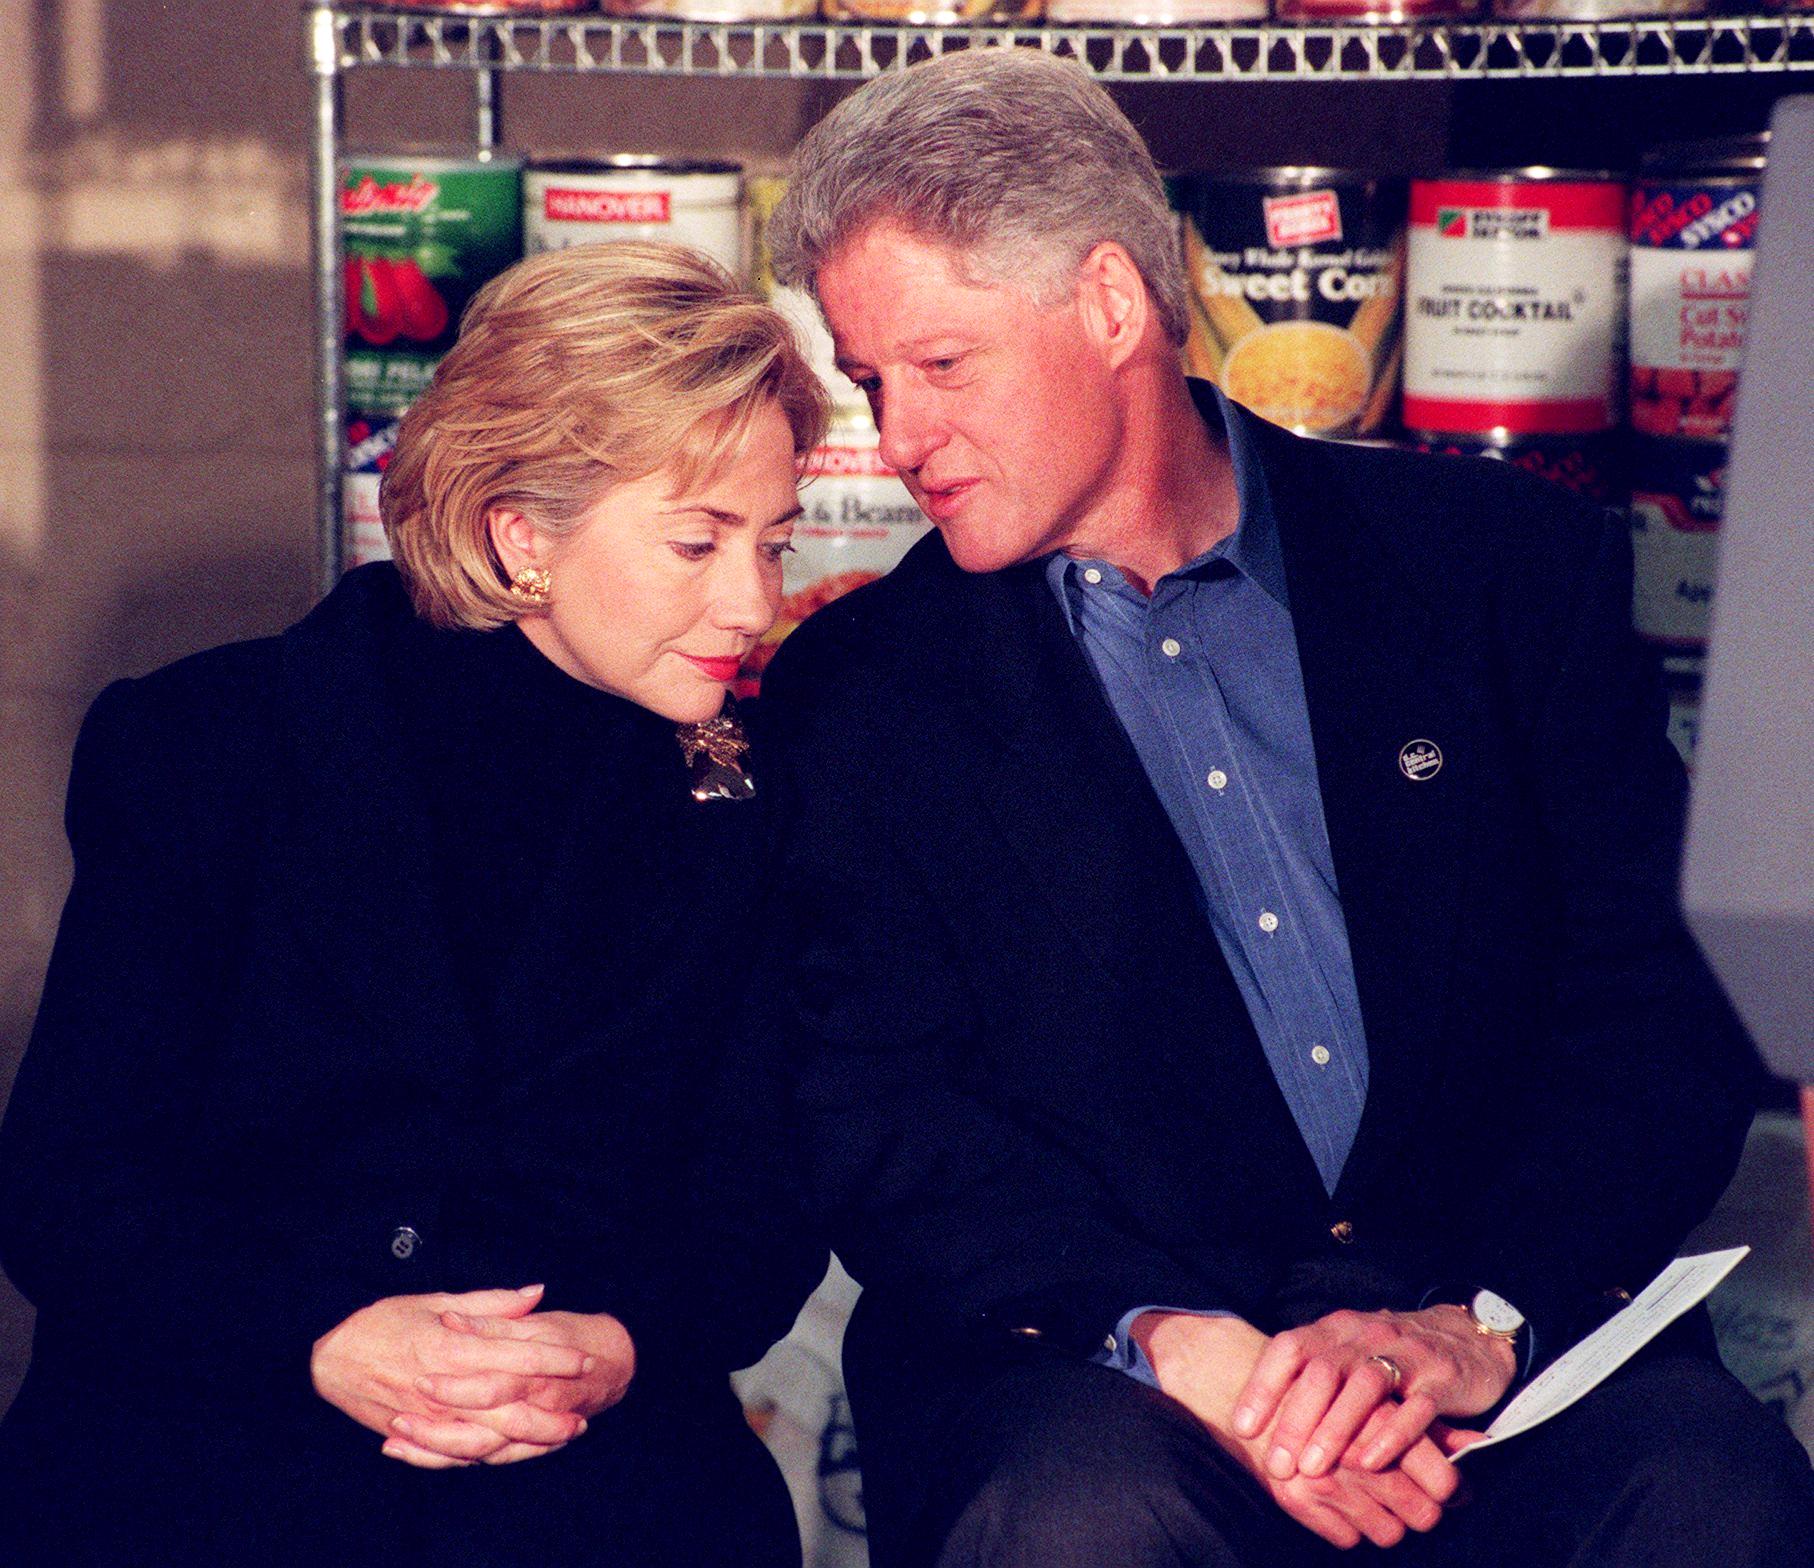 Bill Clinton (R) and First Lady Hillary Clinton (L) prepare to speak 